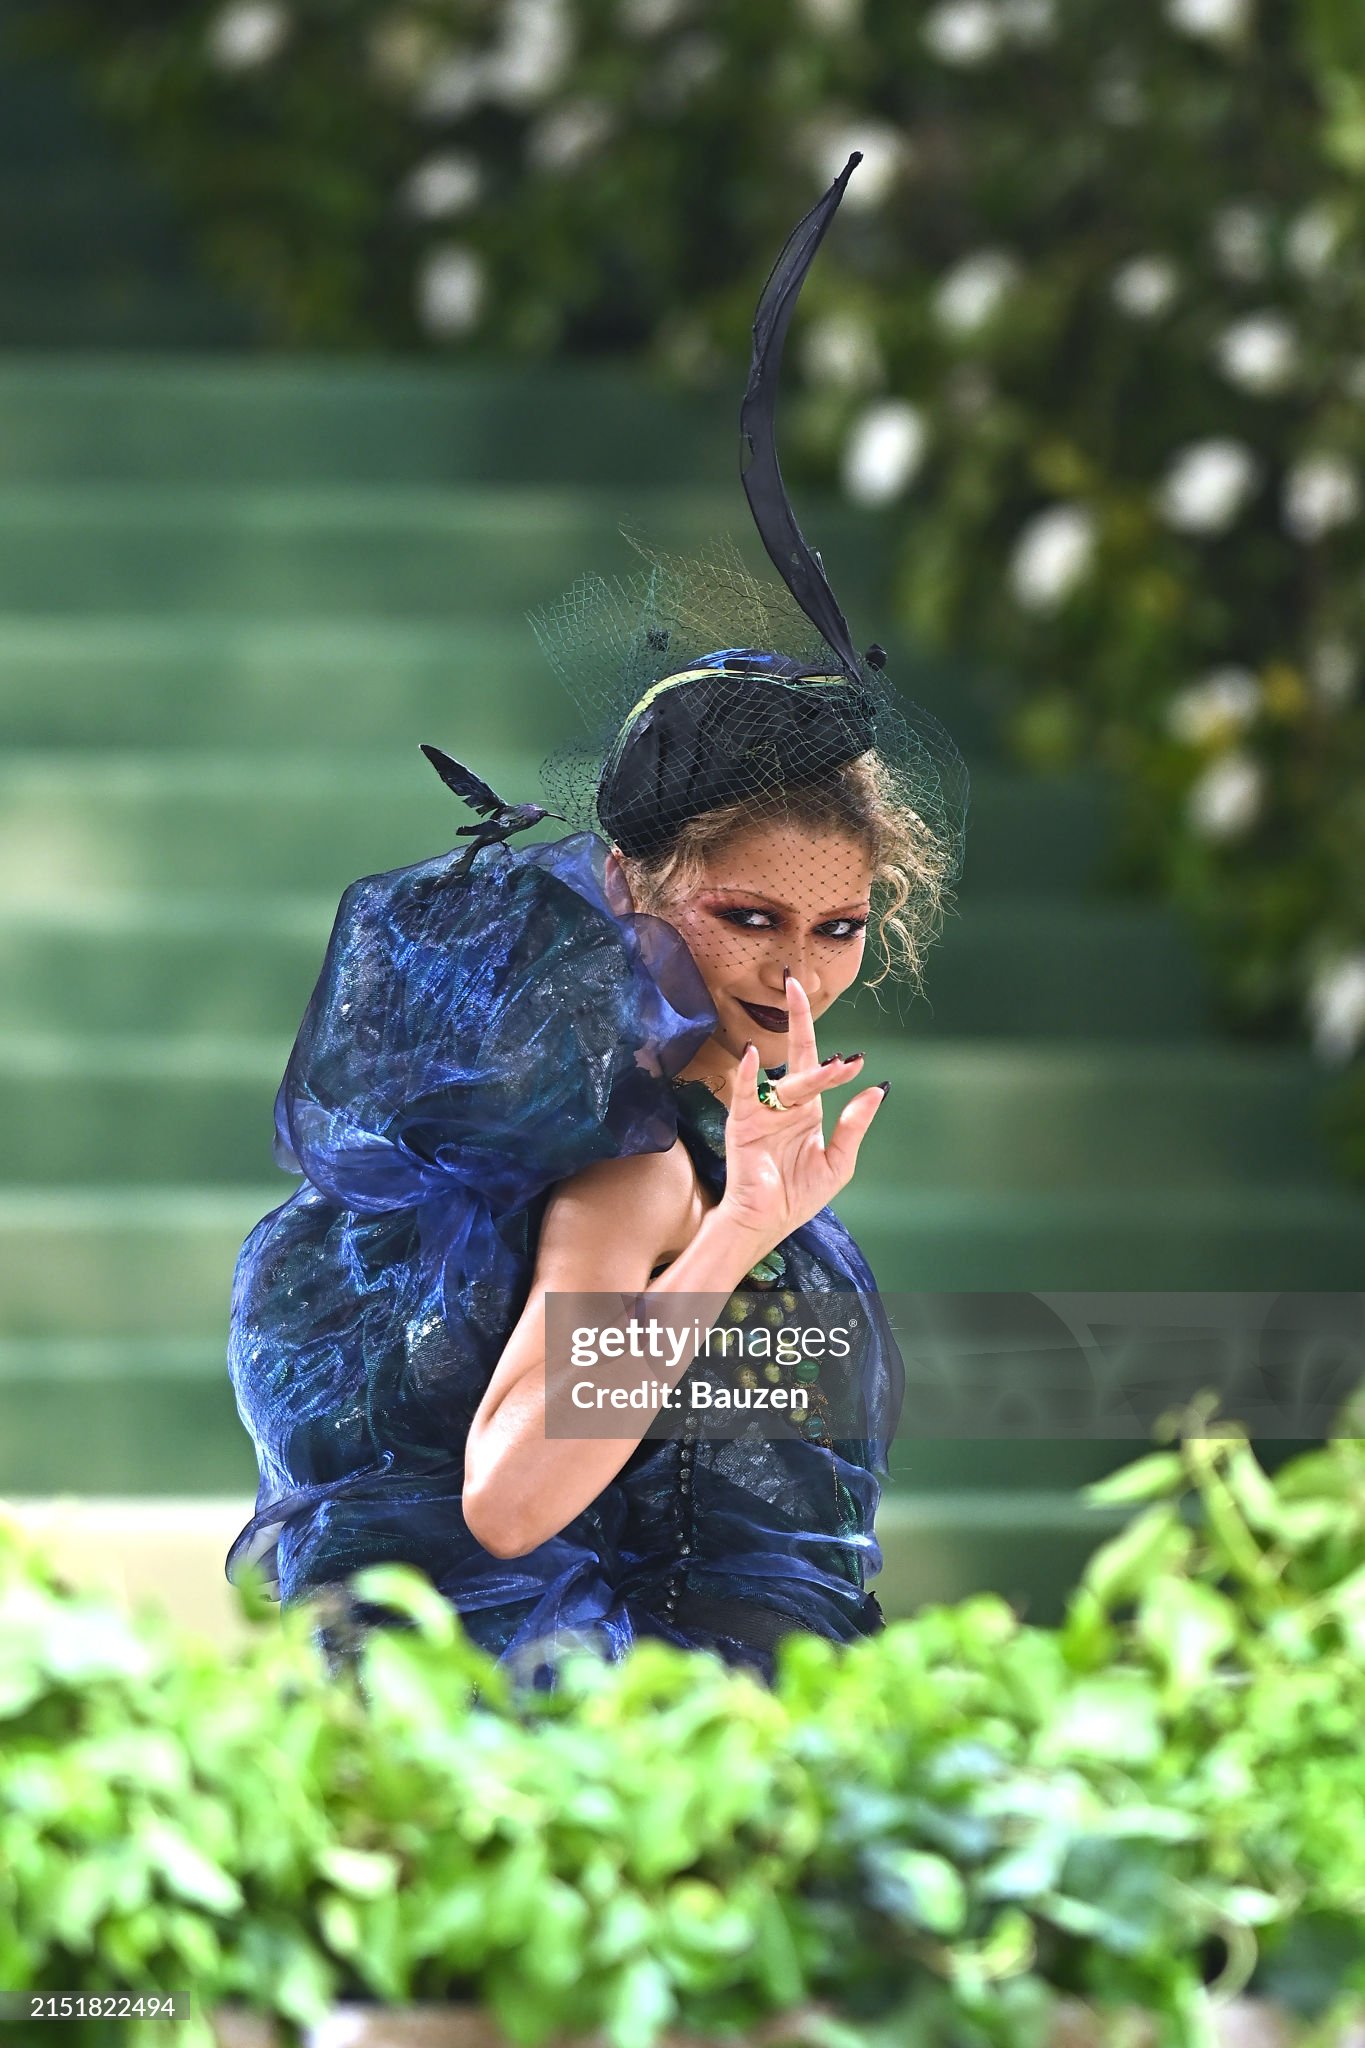 gettyimages-2151822494-2048x2048.jpg